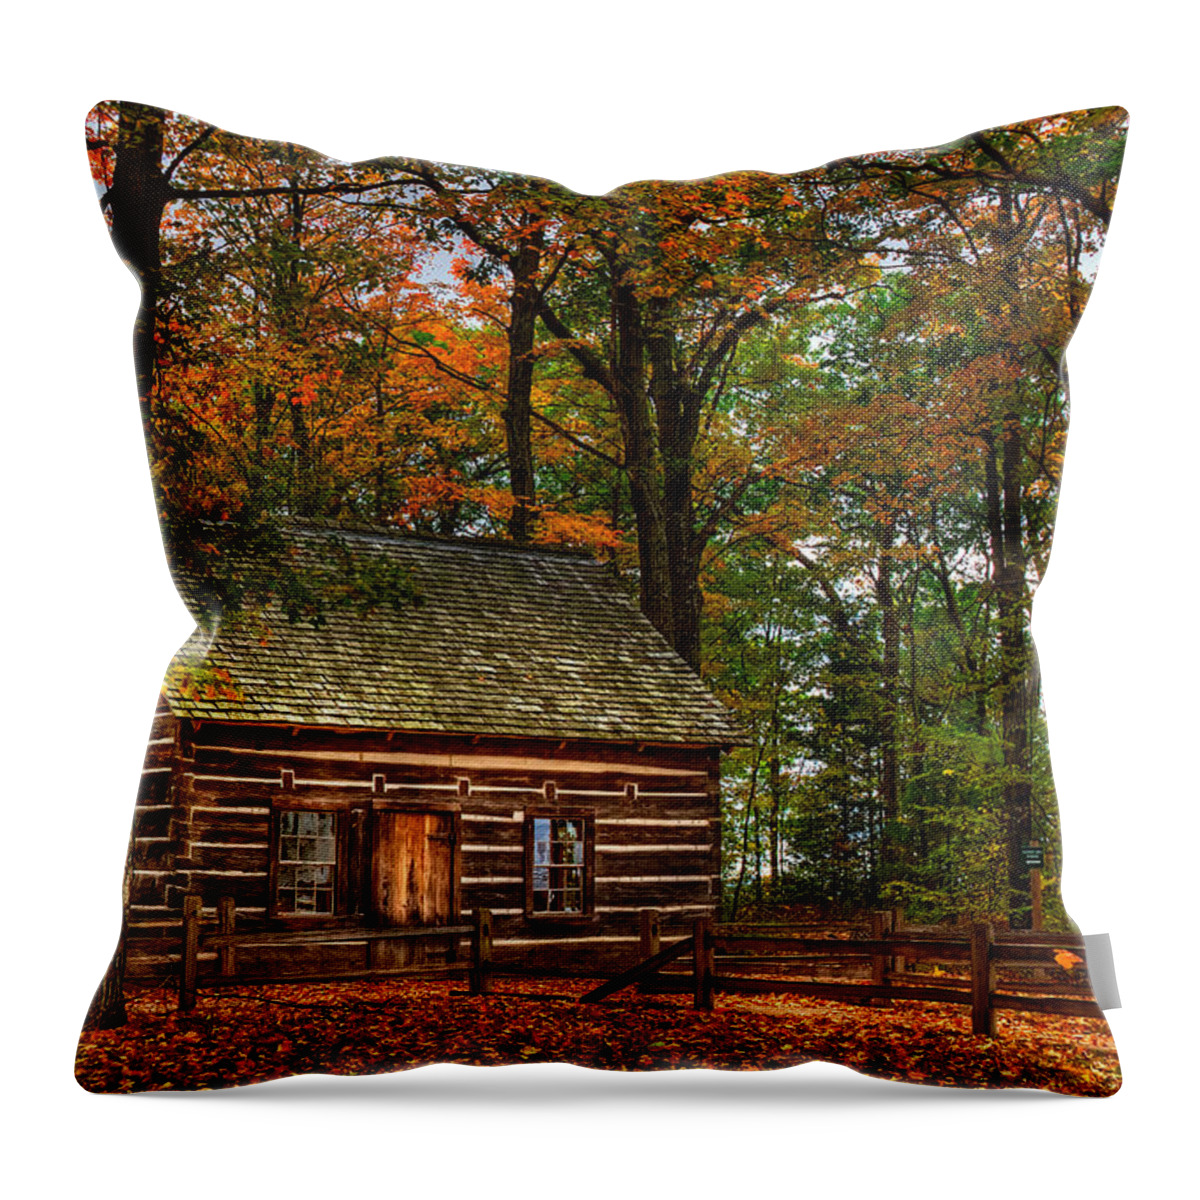 Image Throw Pillow featuring the photograph Log Cabin In Autumn Color by Richard Gregurich